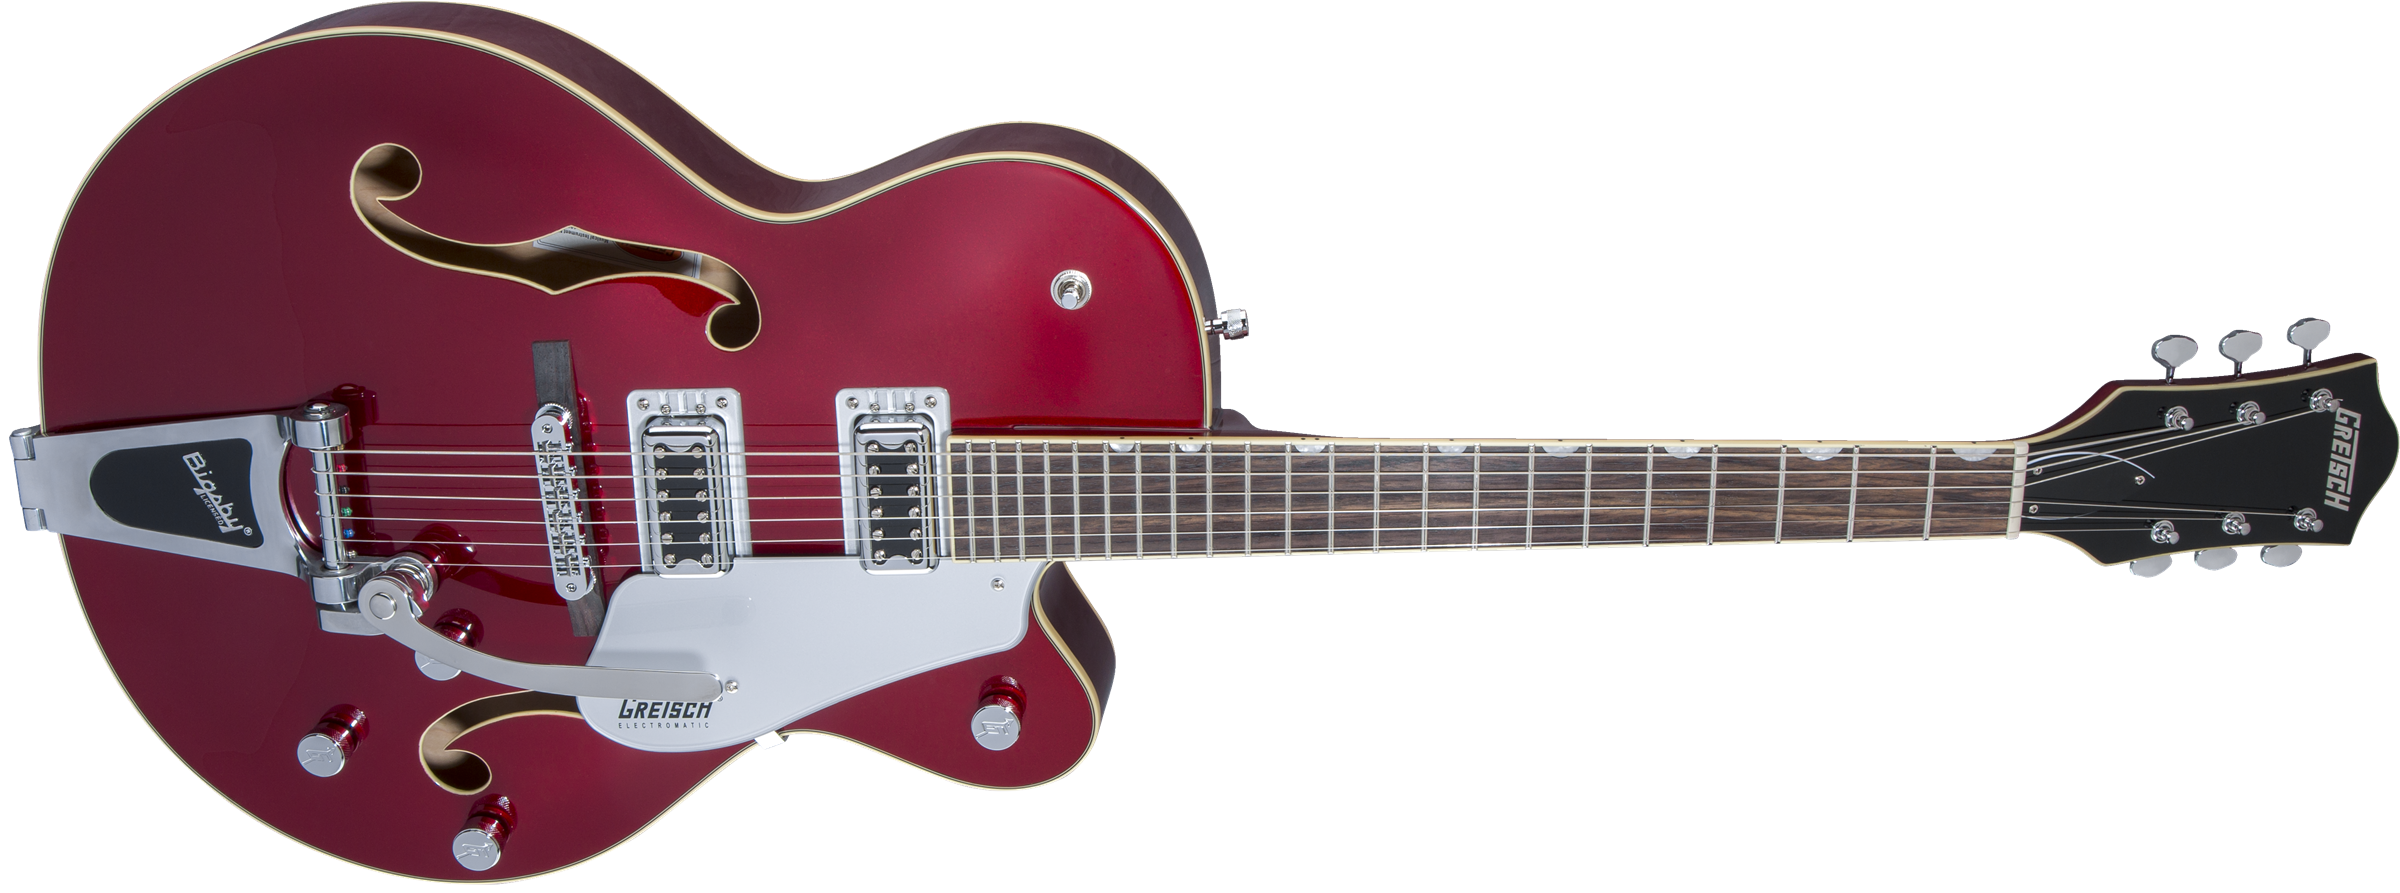 Gretsch G5420t Electromatic Hollow Body 2018 - Candy Apple Red - Guitare Électrique 1/2 Caisse - Variation 2